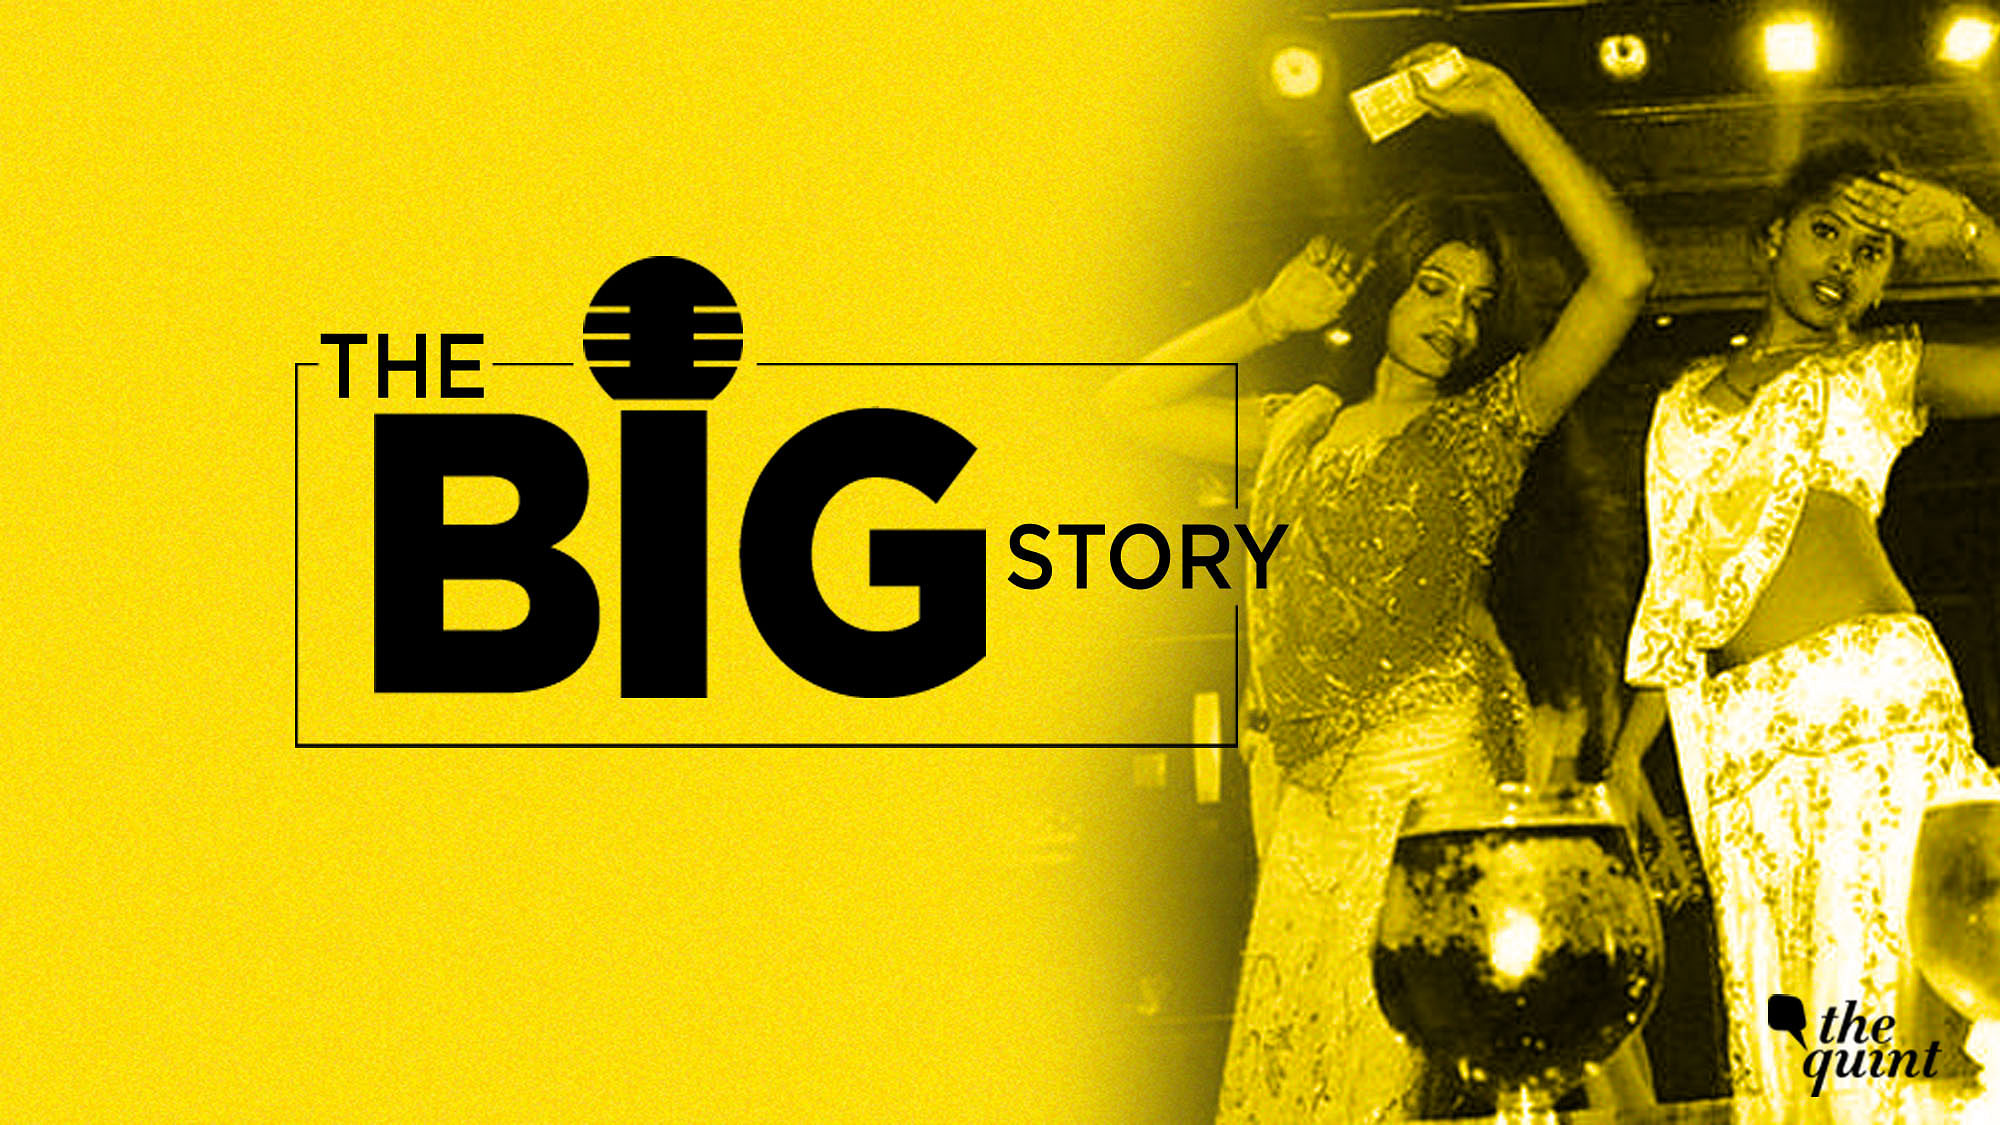 In this episode of the Big Story podcast, <b>The Quint </b>looks at the ban on dance bars in India’s commercial capital – Mumbai, and the verdict that lifted the ban.